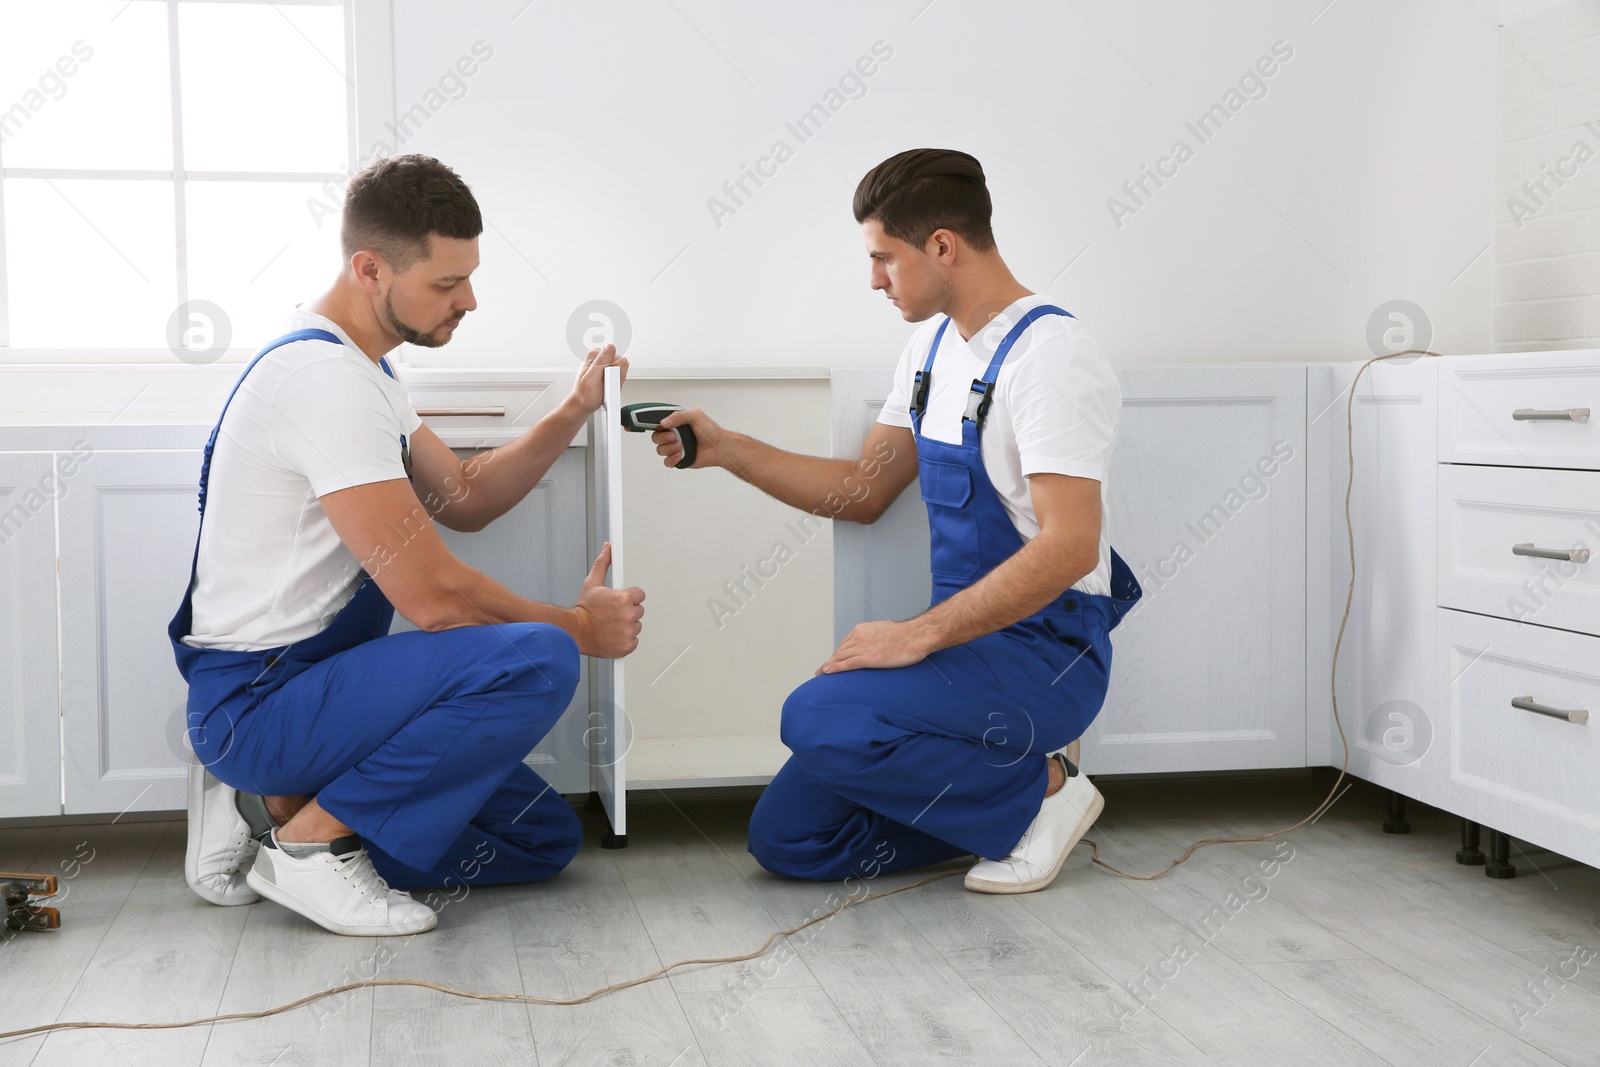 Photo of Maintenance workers installing new kitchen furniture indoors